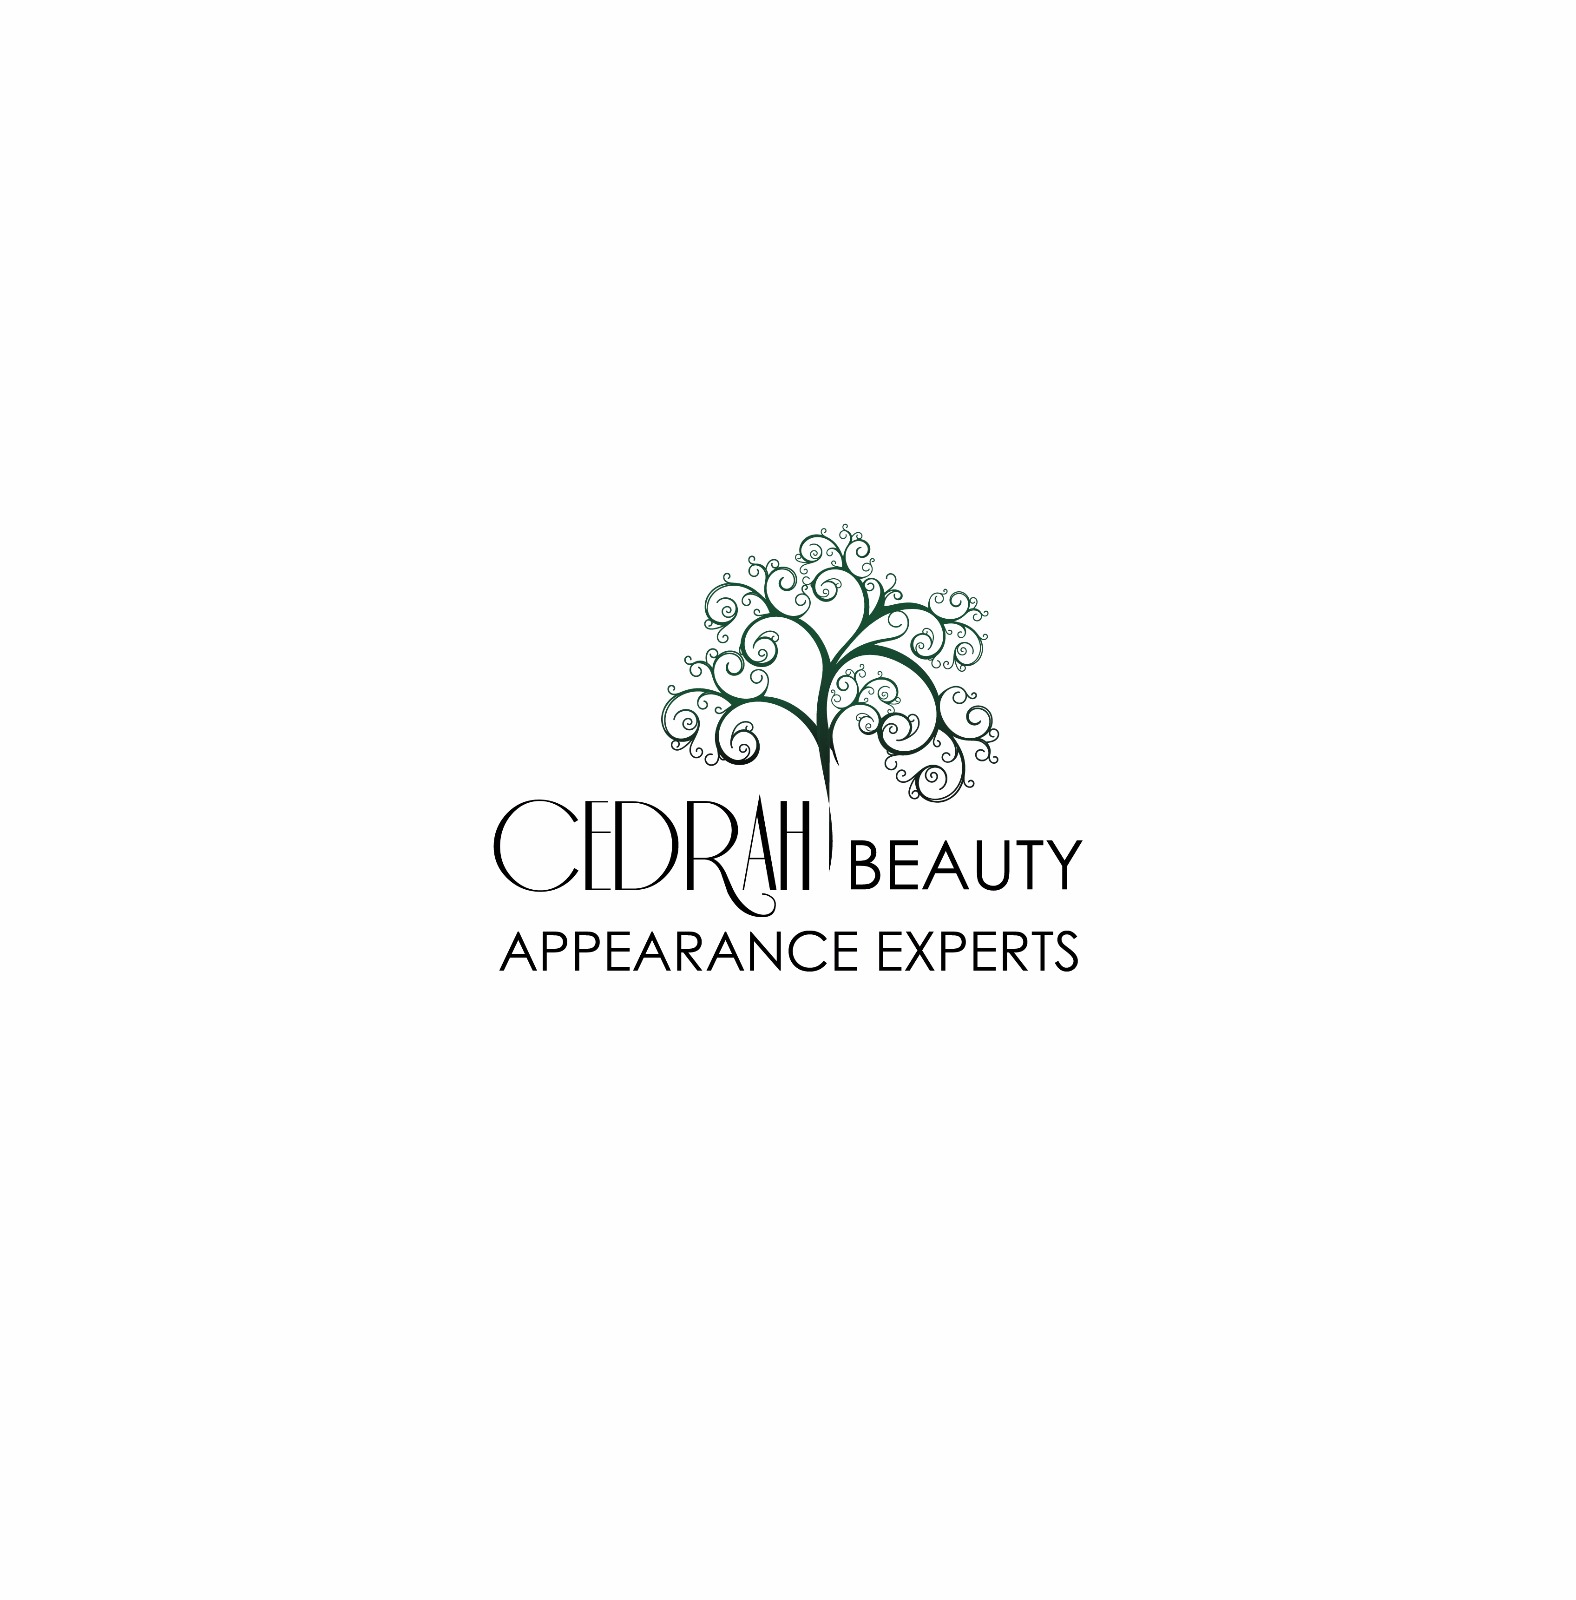 Cedrah Company For The Cosmetic Industry